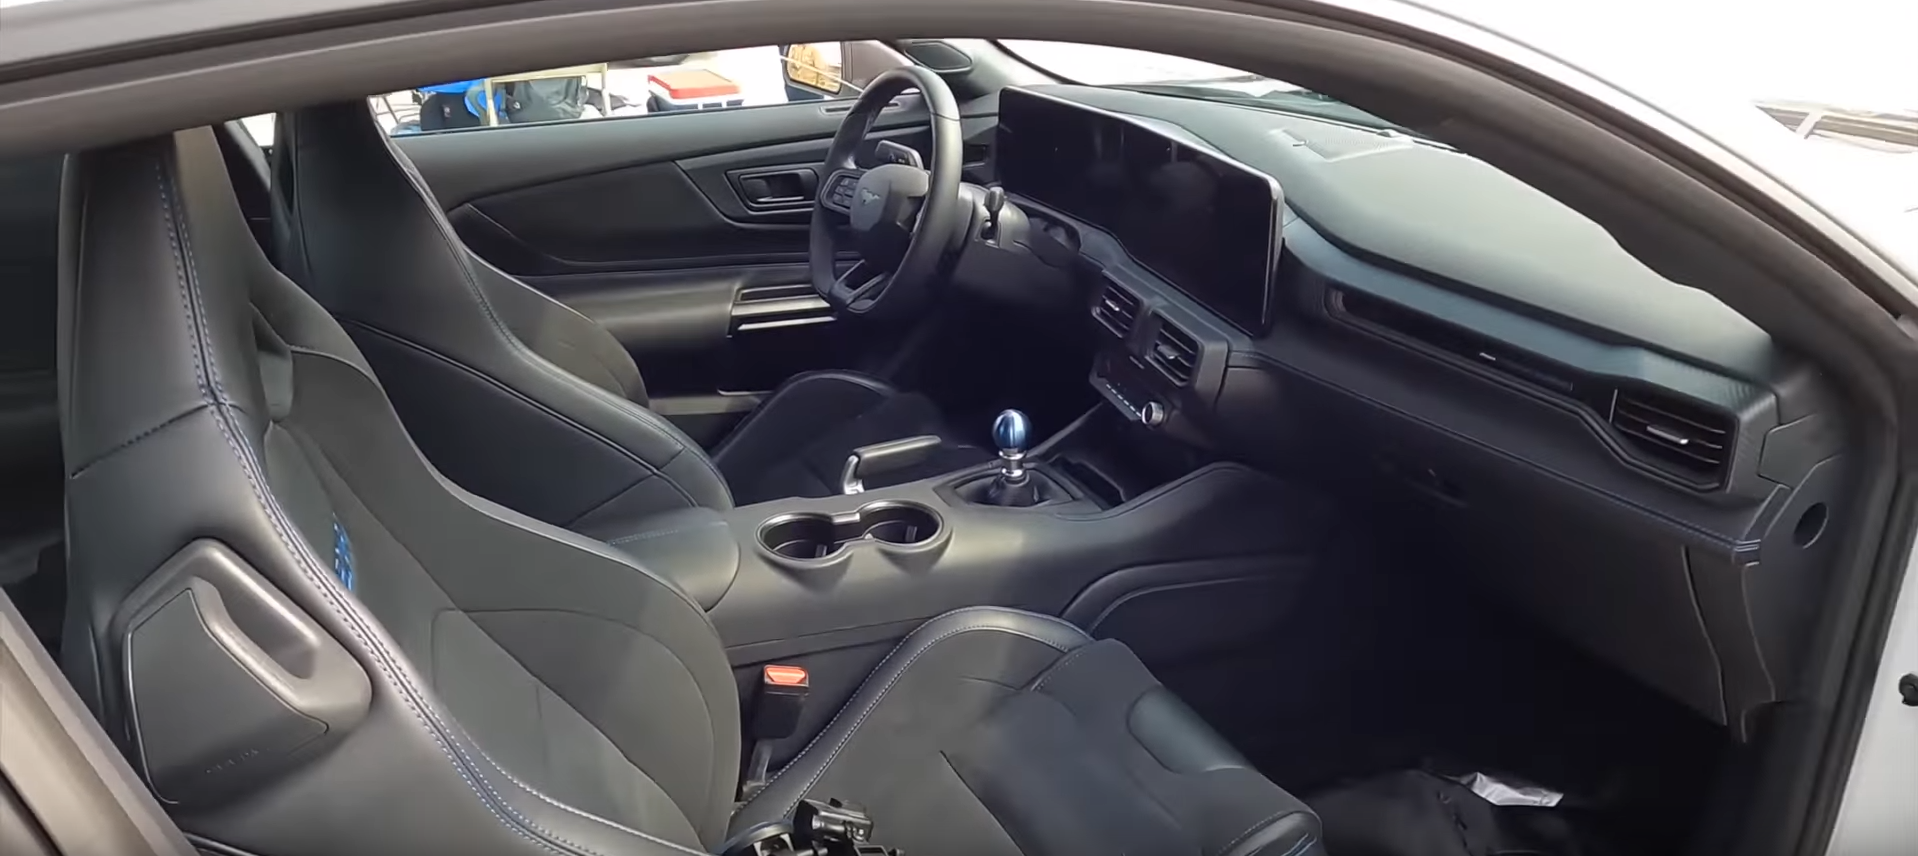 S650 Mustang Any photos of a Dark Horse interior without Appearance Package? 1687485589829